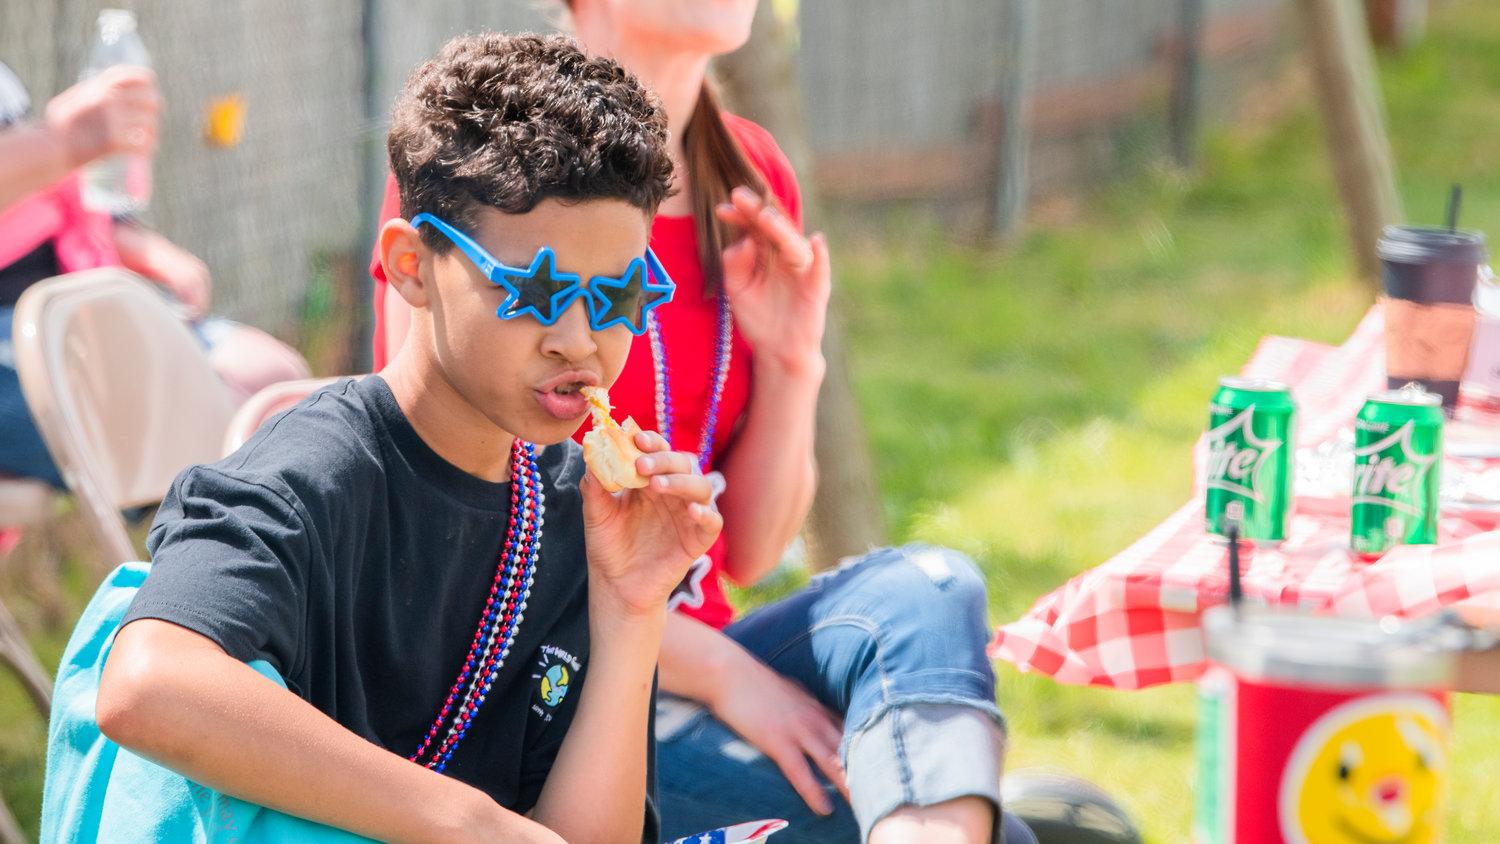 Malik Culver eats a hot dog during an event held Saturday at the Lions Den Campground in Mineral.